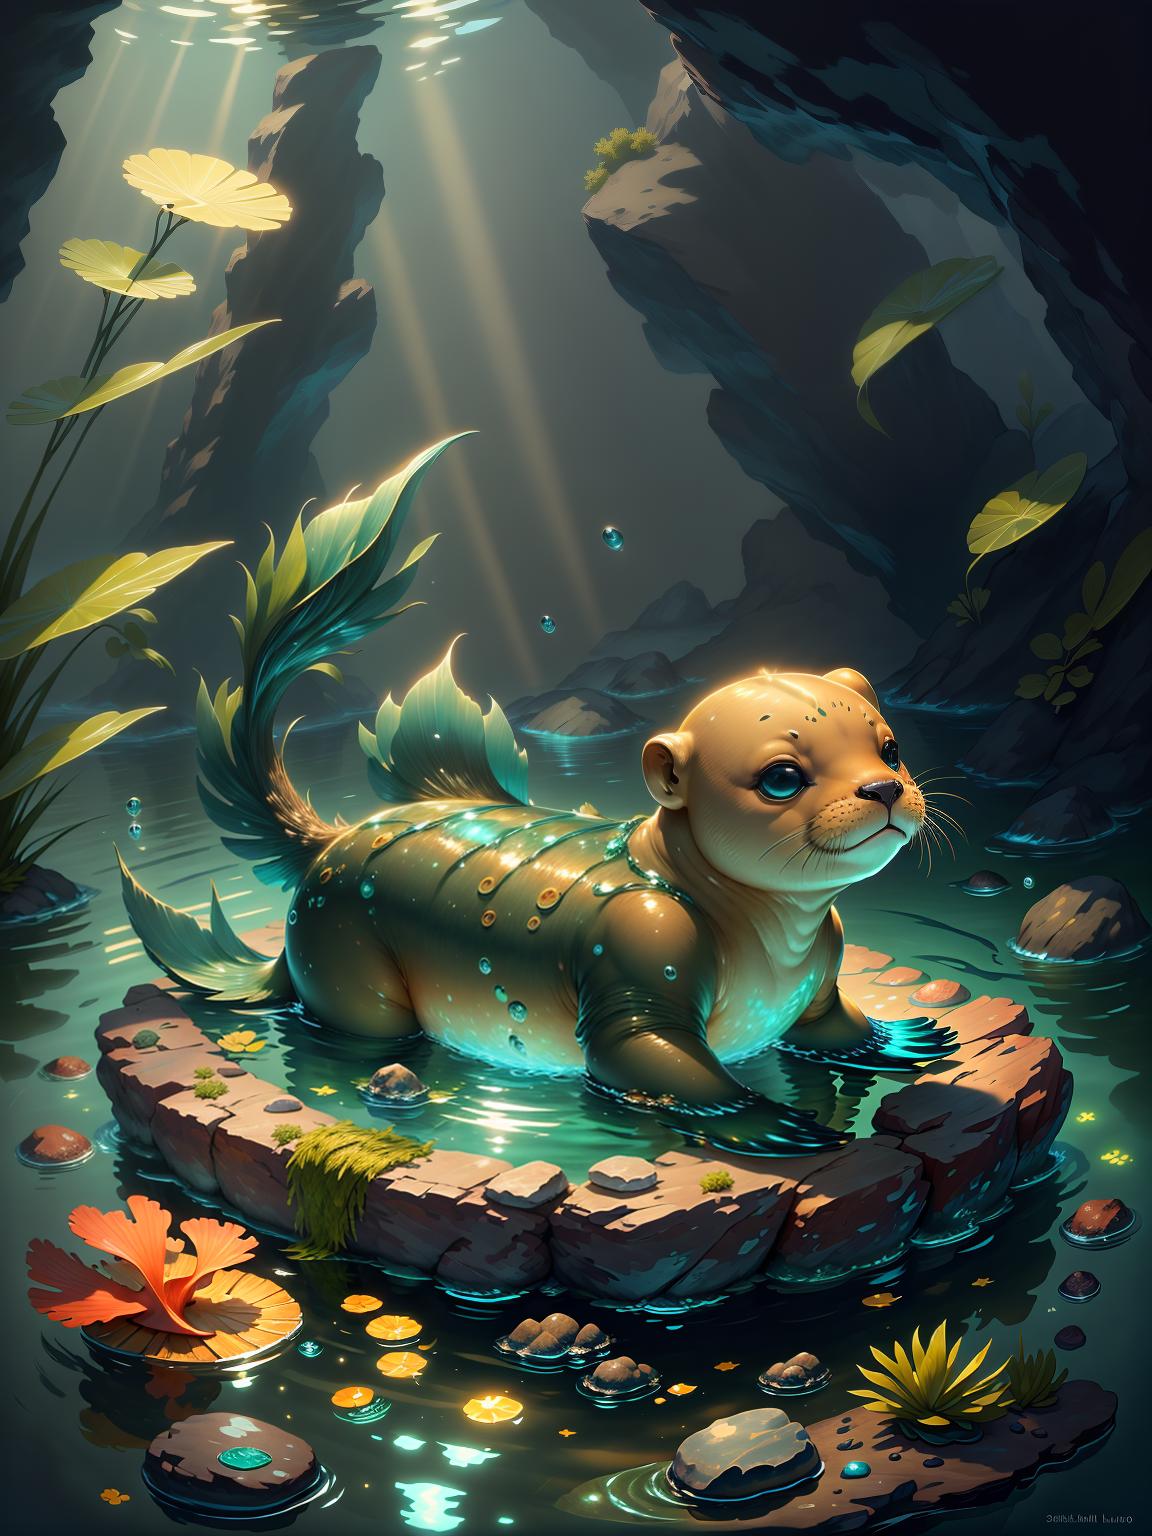  master piece, best quality, ultra detailed, highres, 4k.8k, Sea lion boy., Swimming leisurely in the water., Tranquil., BREAK A serene portrayal of a leisurely sea lion boy swimming gently., Underwater world., Coral, seashells, sunlight, rocks., BREAK Peaceful and serene., Sunlight filtering through the water, creating a tranquil ambiance., magic particles,Cu73Cre4ture,fun00d